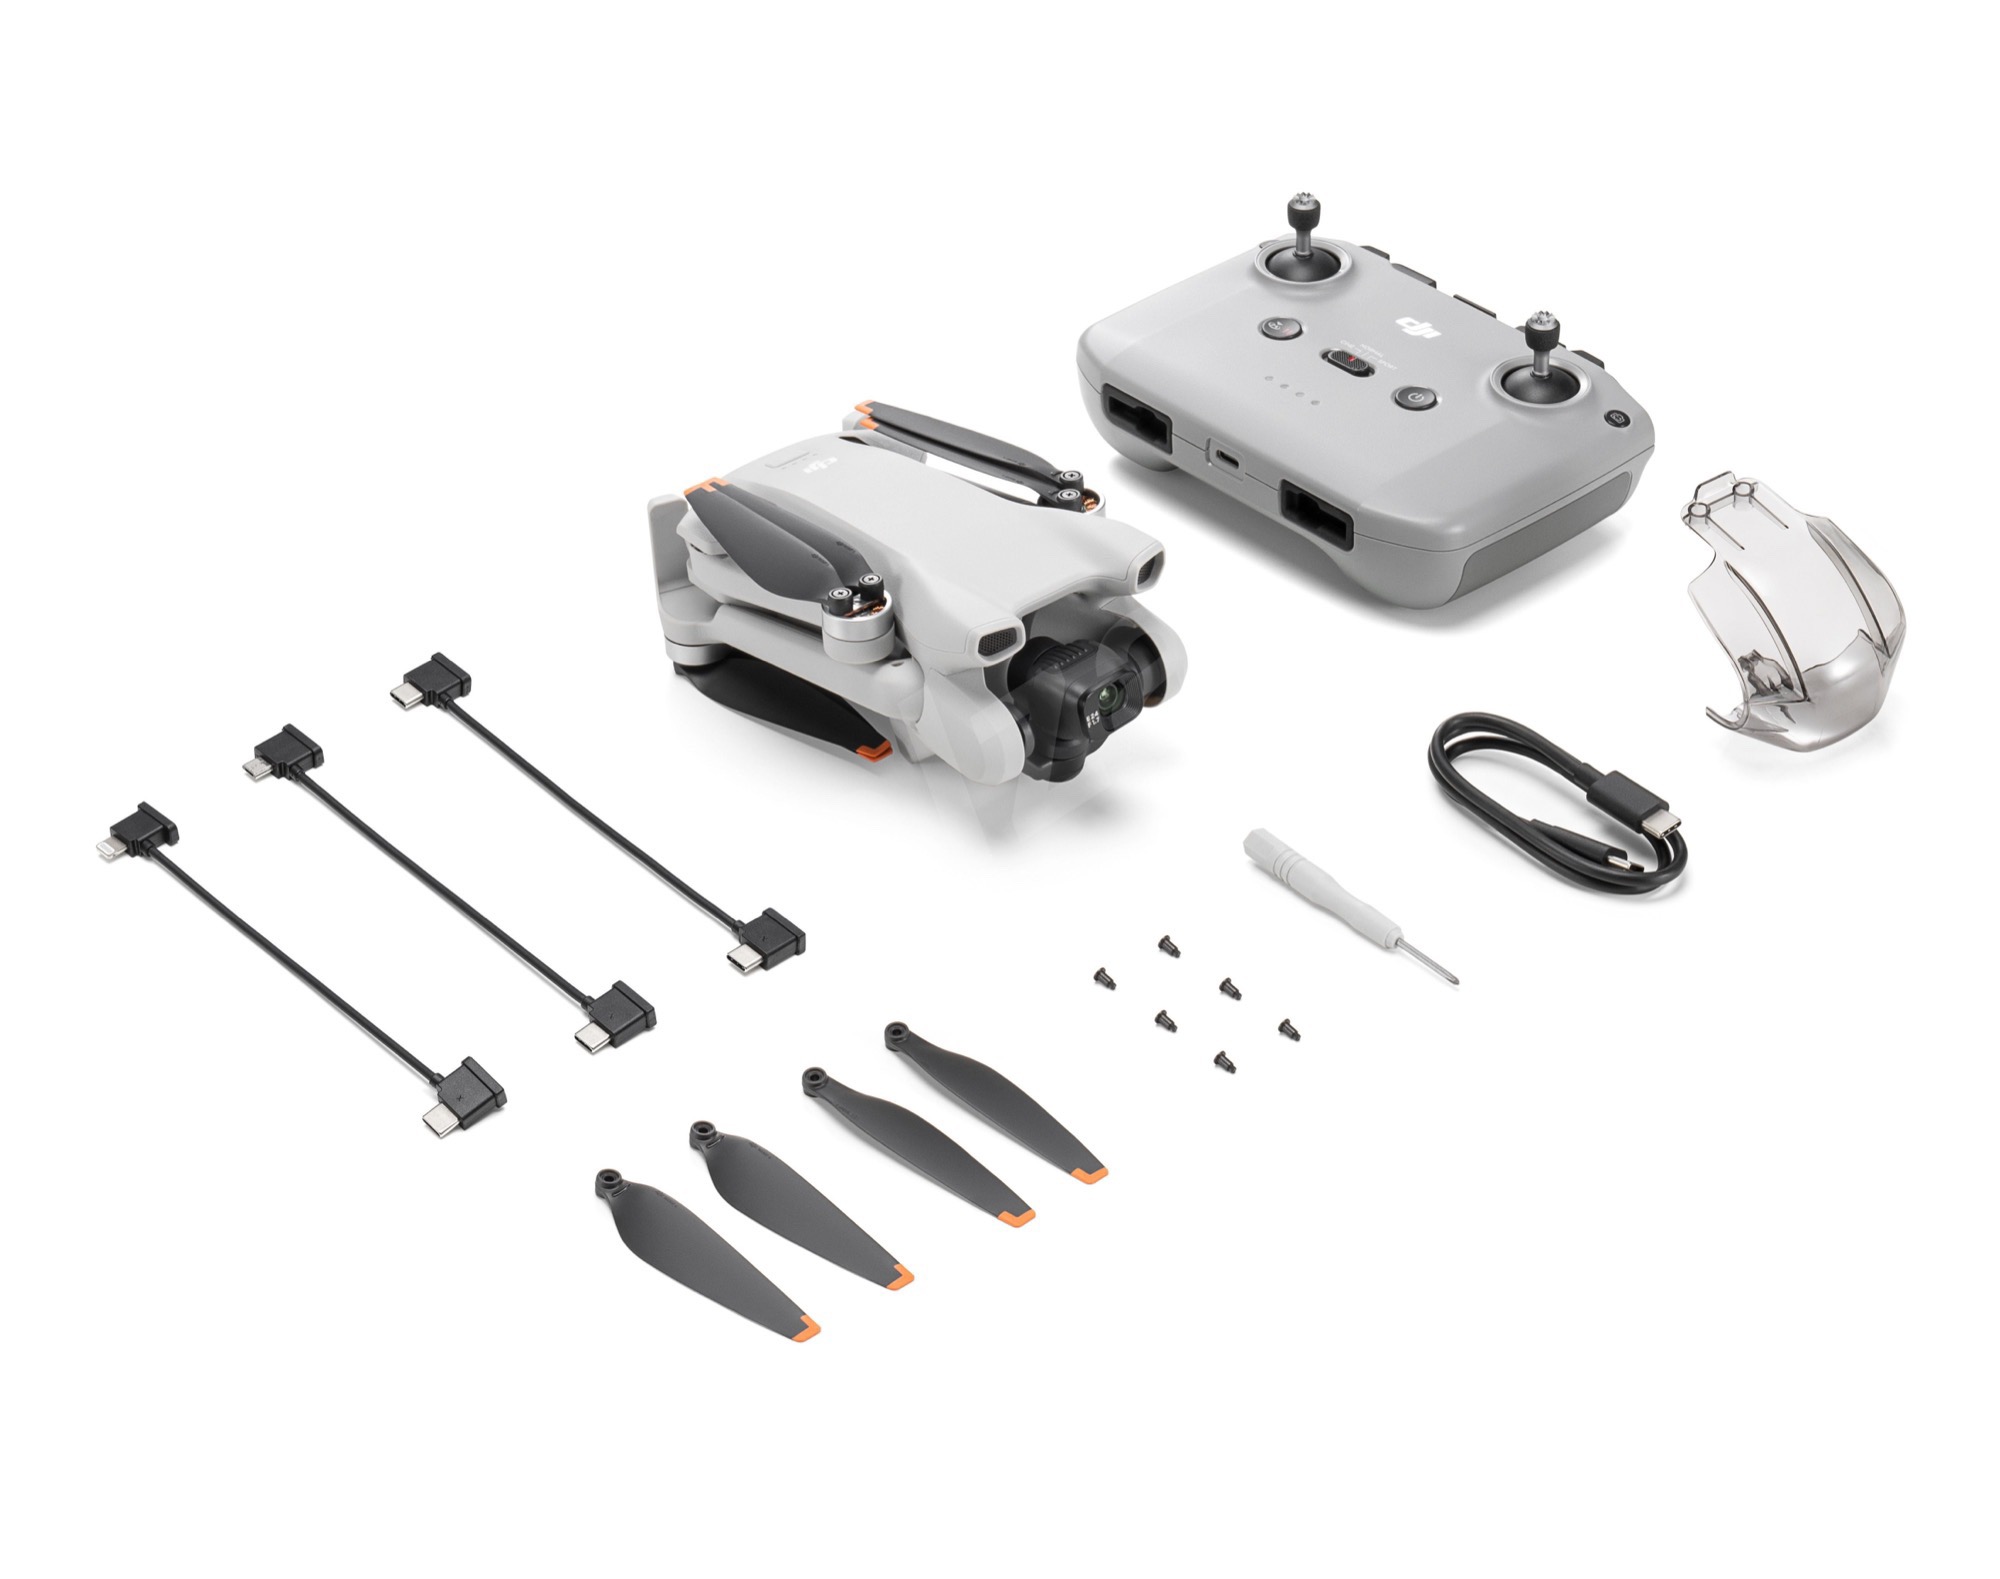 remote 3: DJI Mini and specifications confirms News Retailer pricing bundle RC-N1 controller with European NotebookCheck.net -